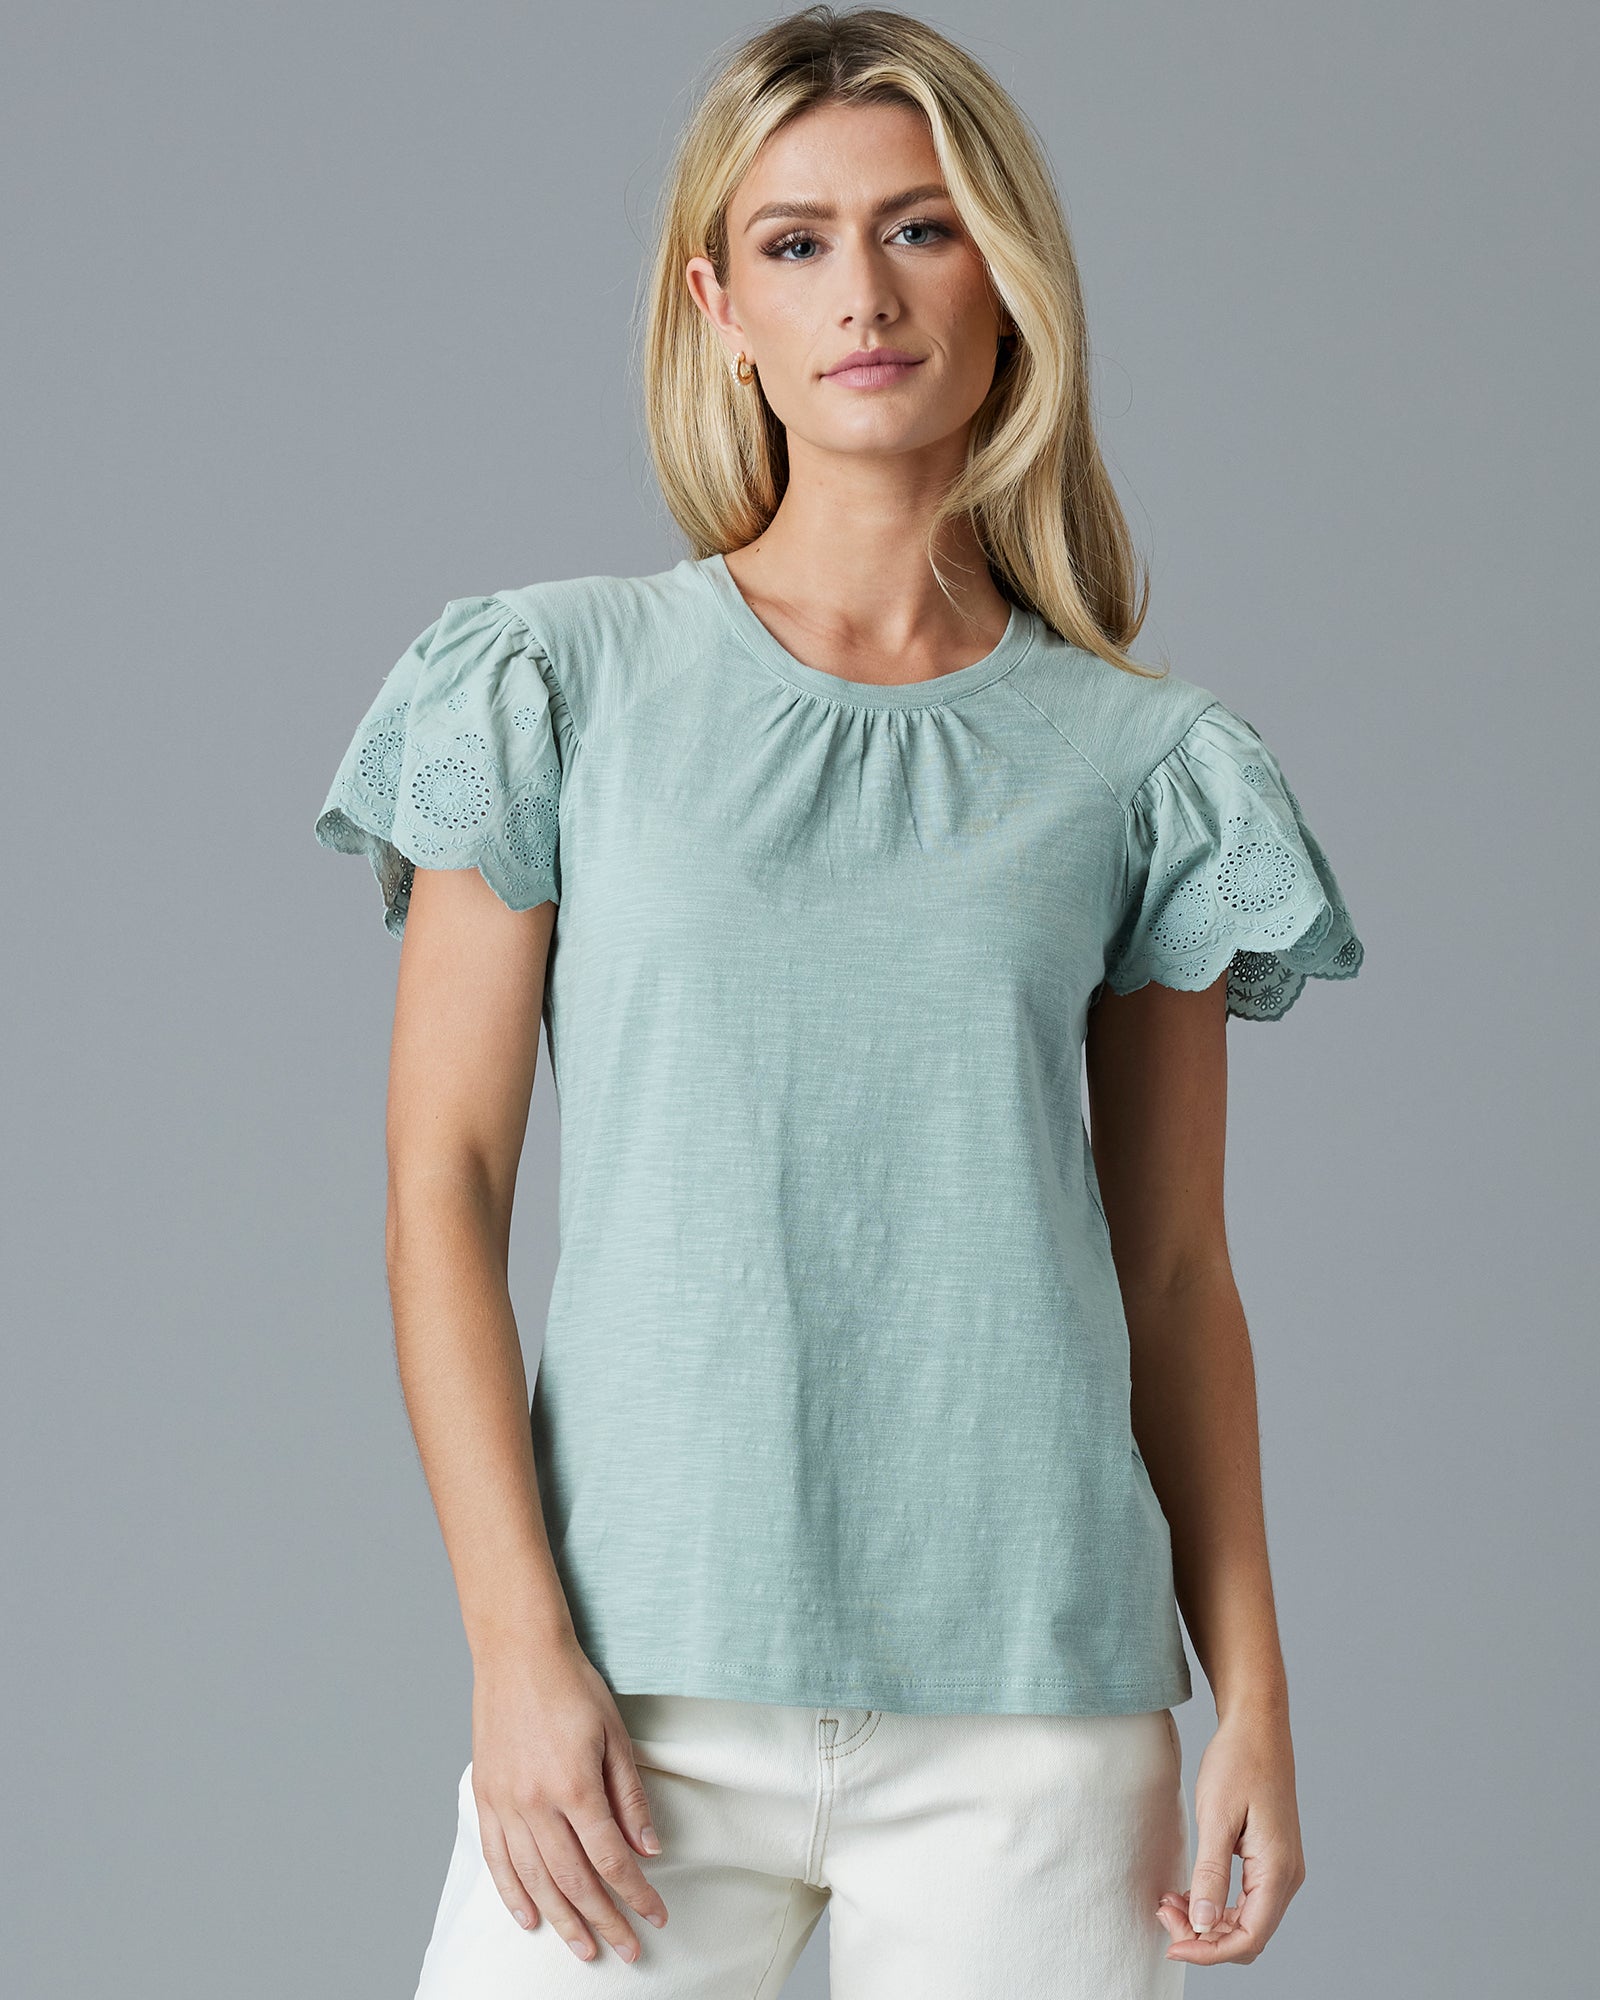 Woman in a green, short sleeved t-shirt with eyelet detail on sleeves.